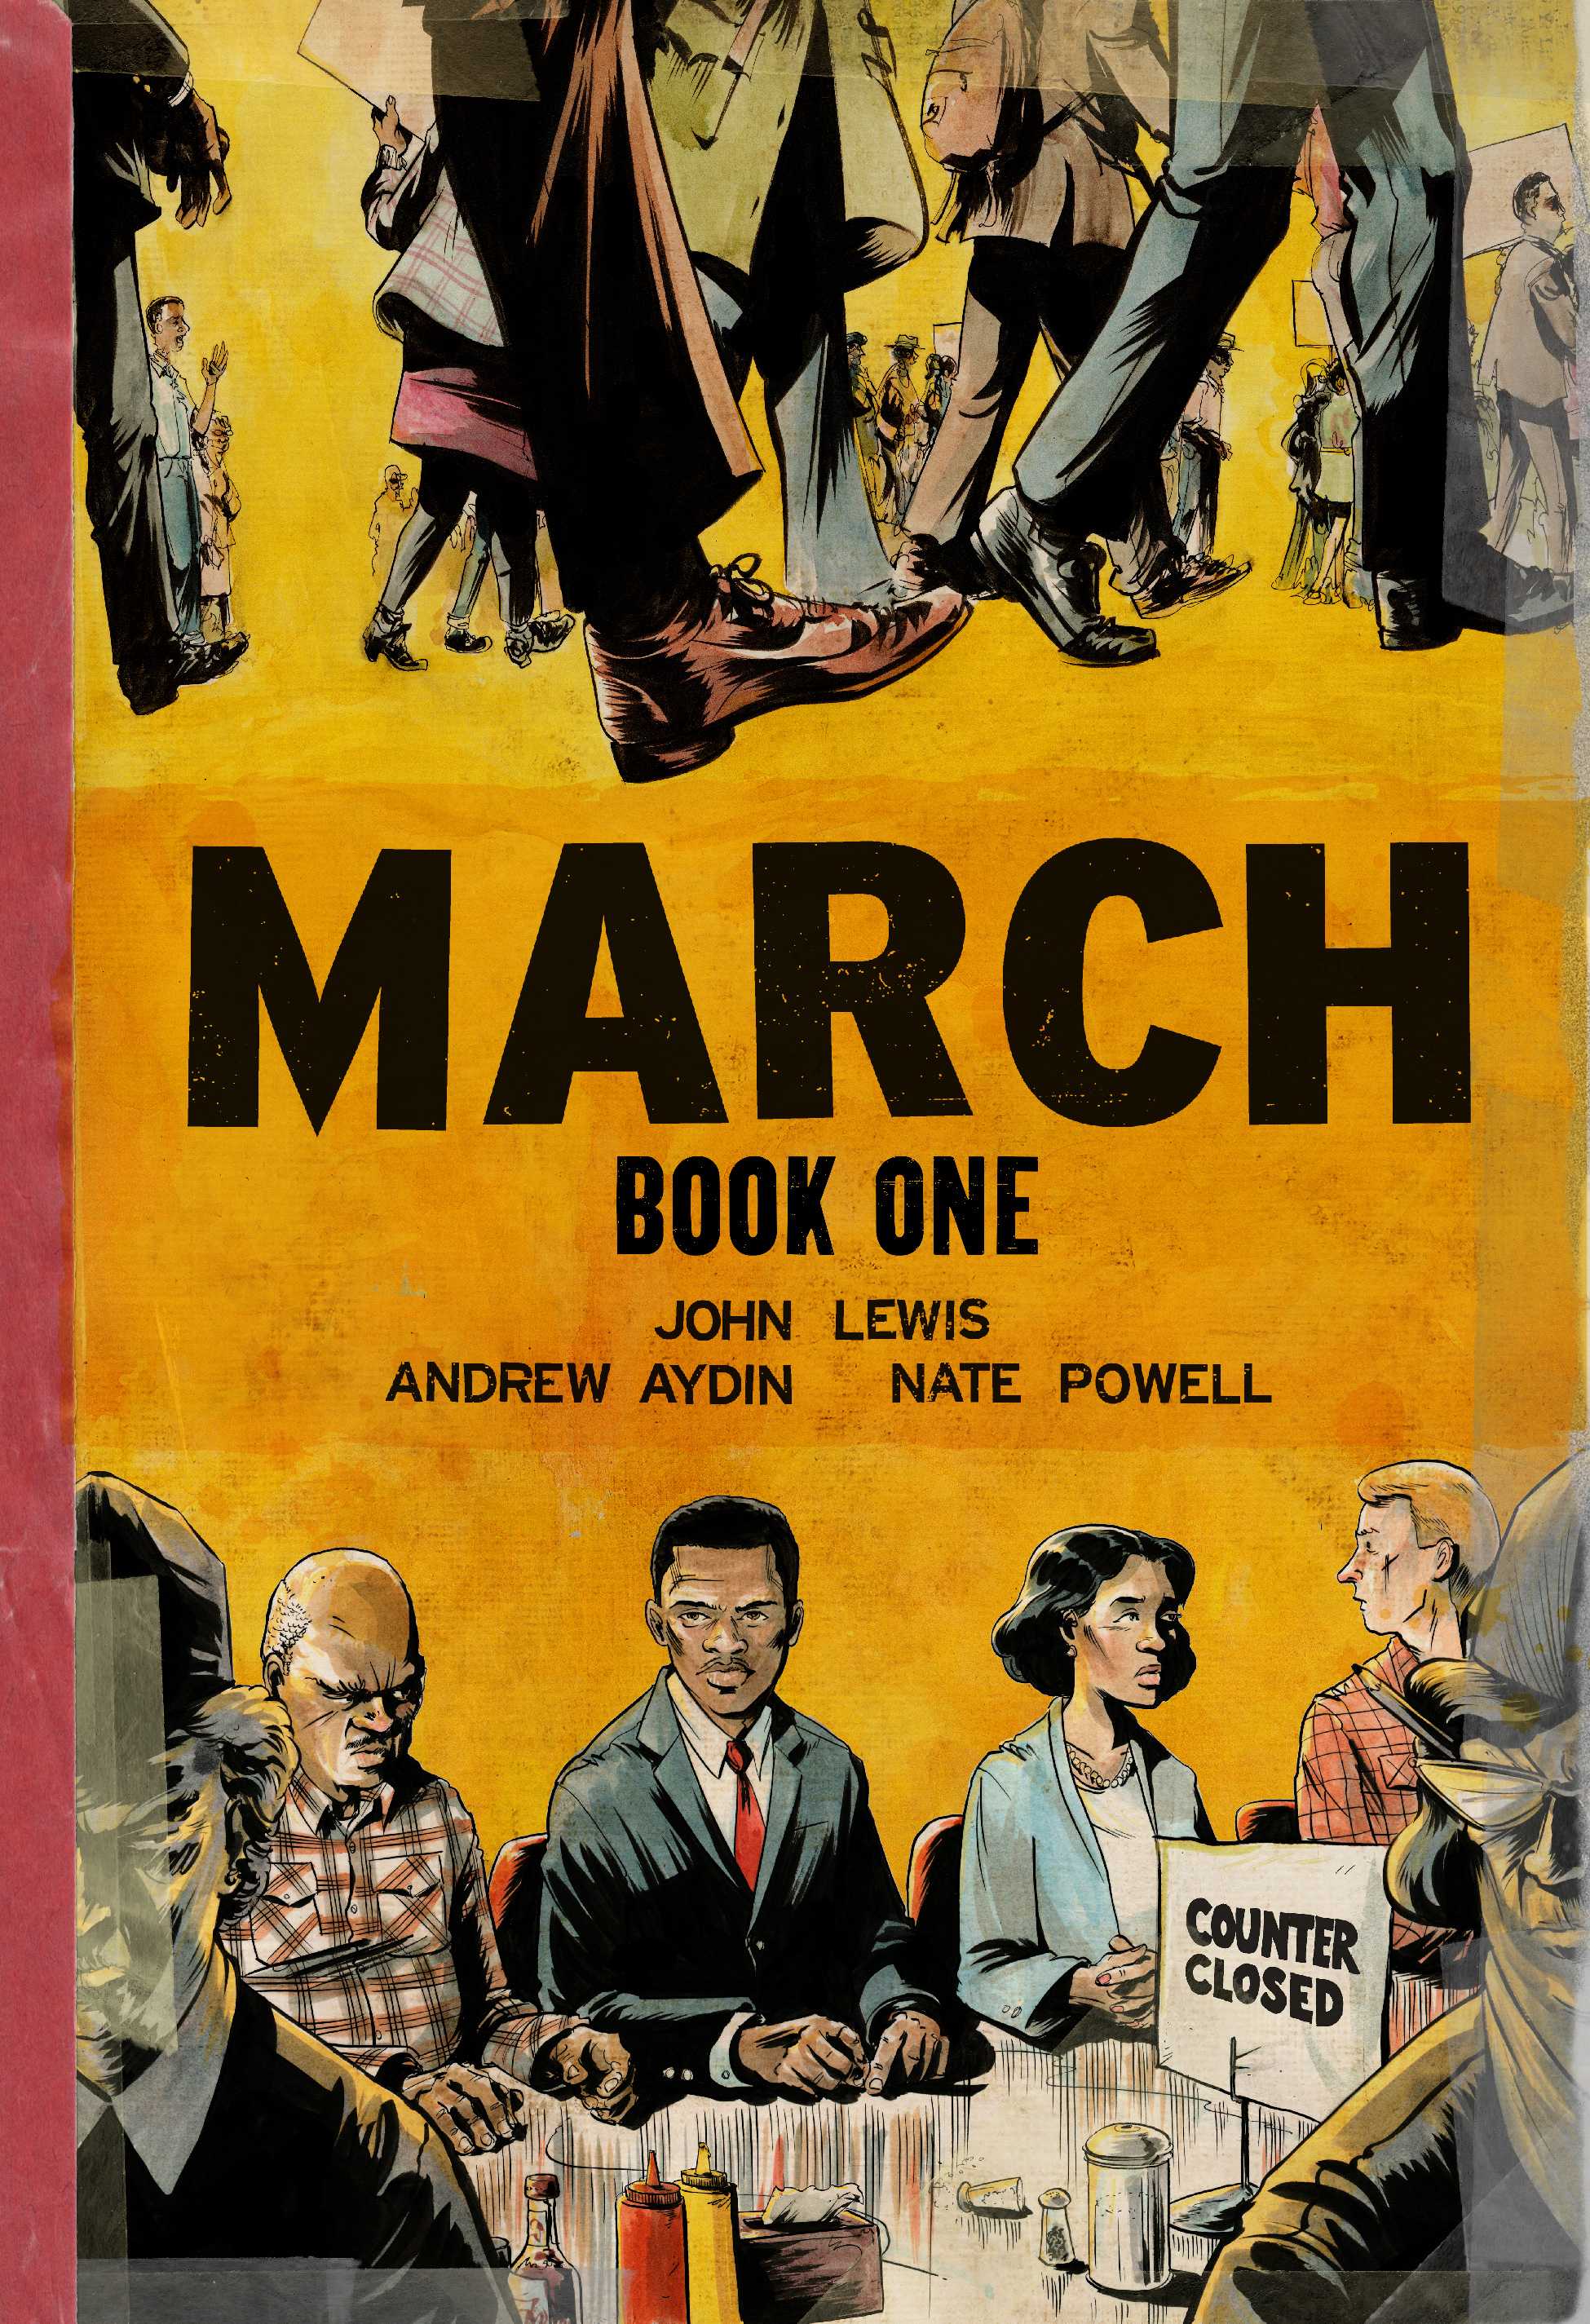 topshelfcomix.comThe graphic novel “March: Book One” was written by Congressman John Lewis and details the March on Washington 50 years ago.